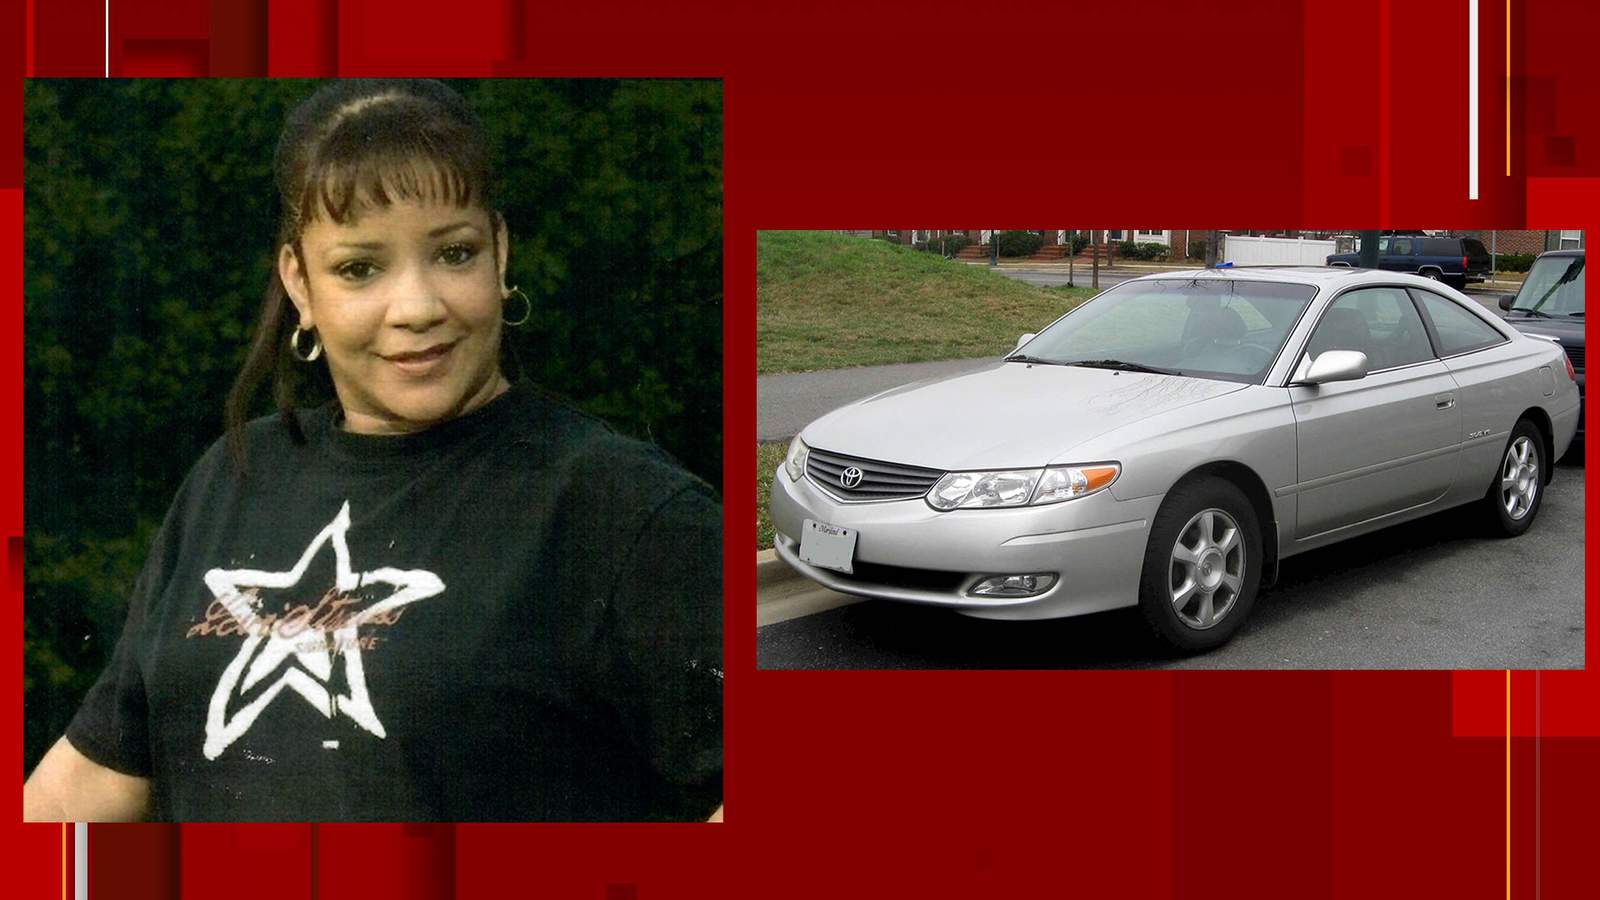 Human remains found in car that missing Ridgeway woman was last driving